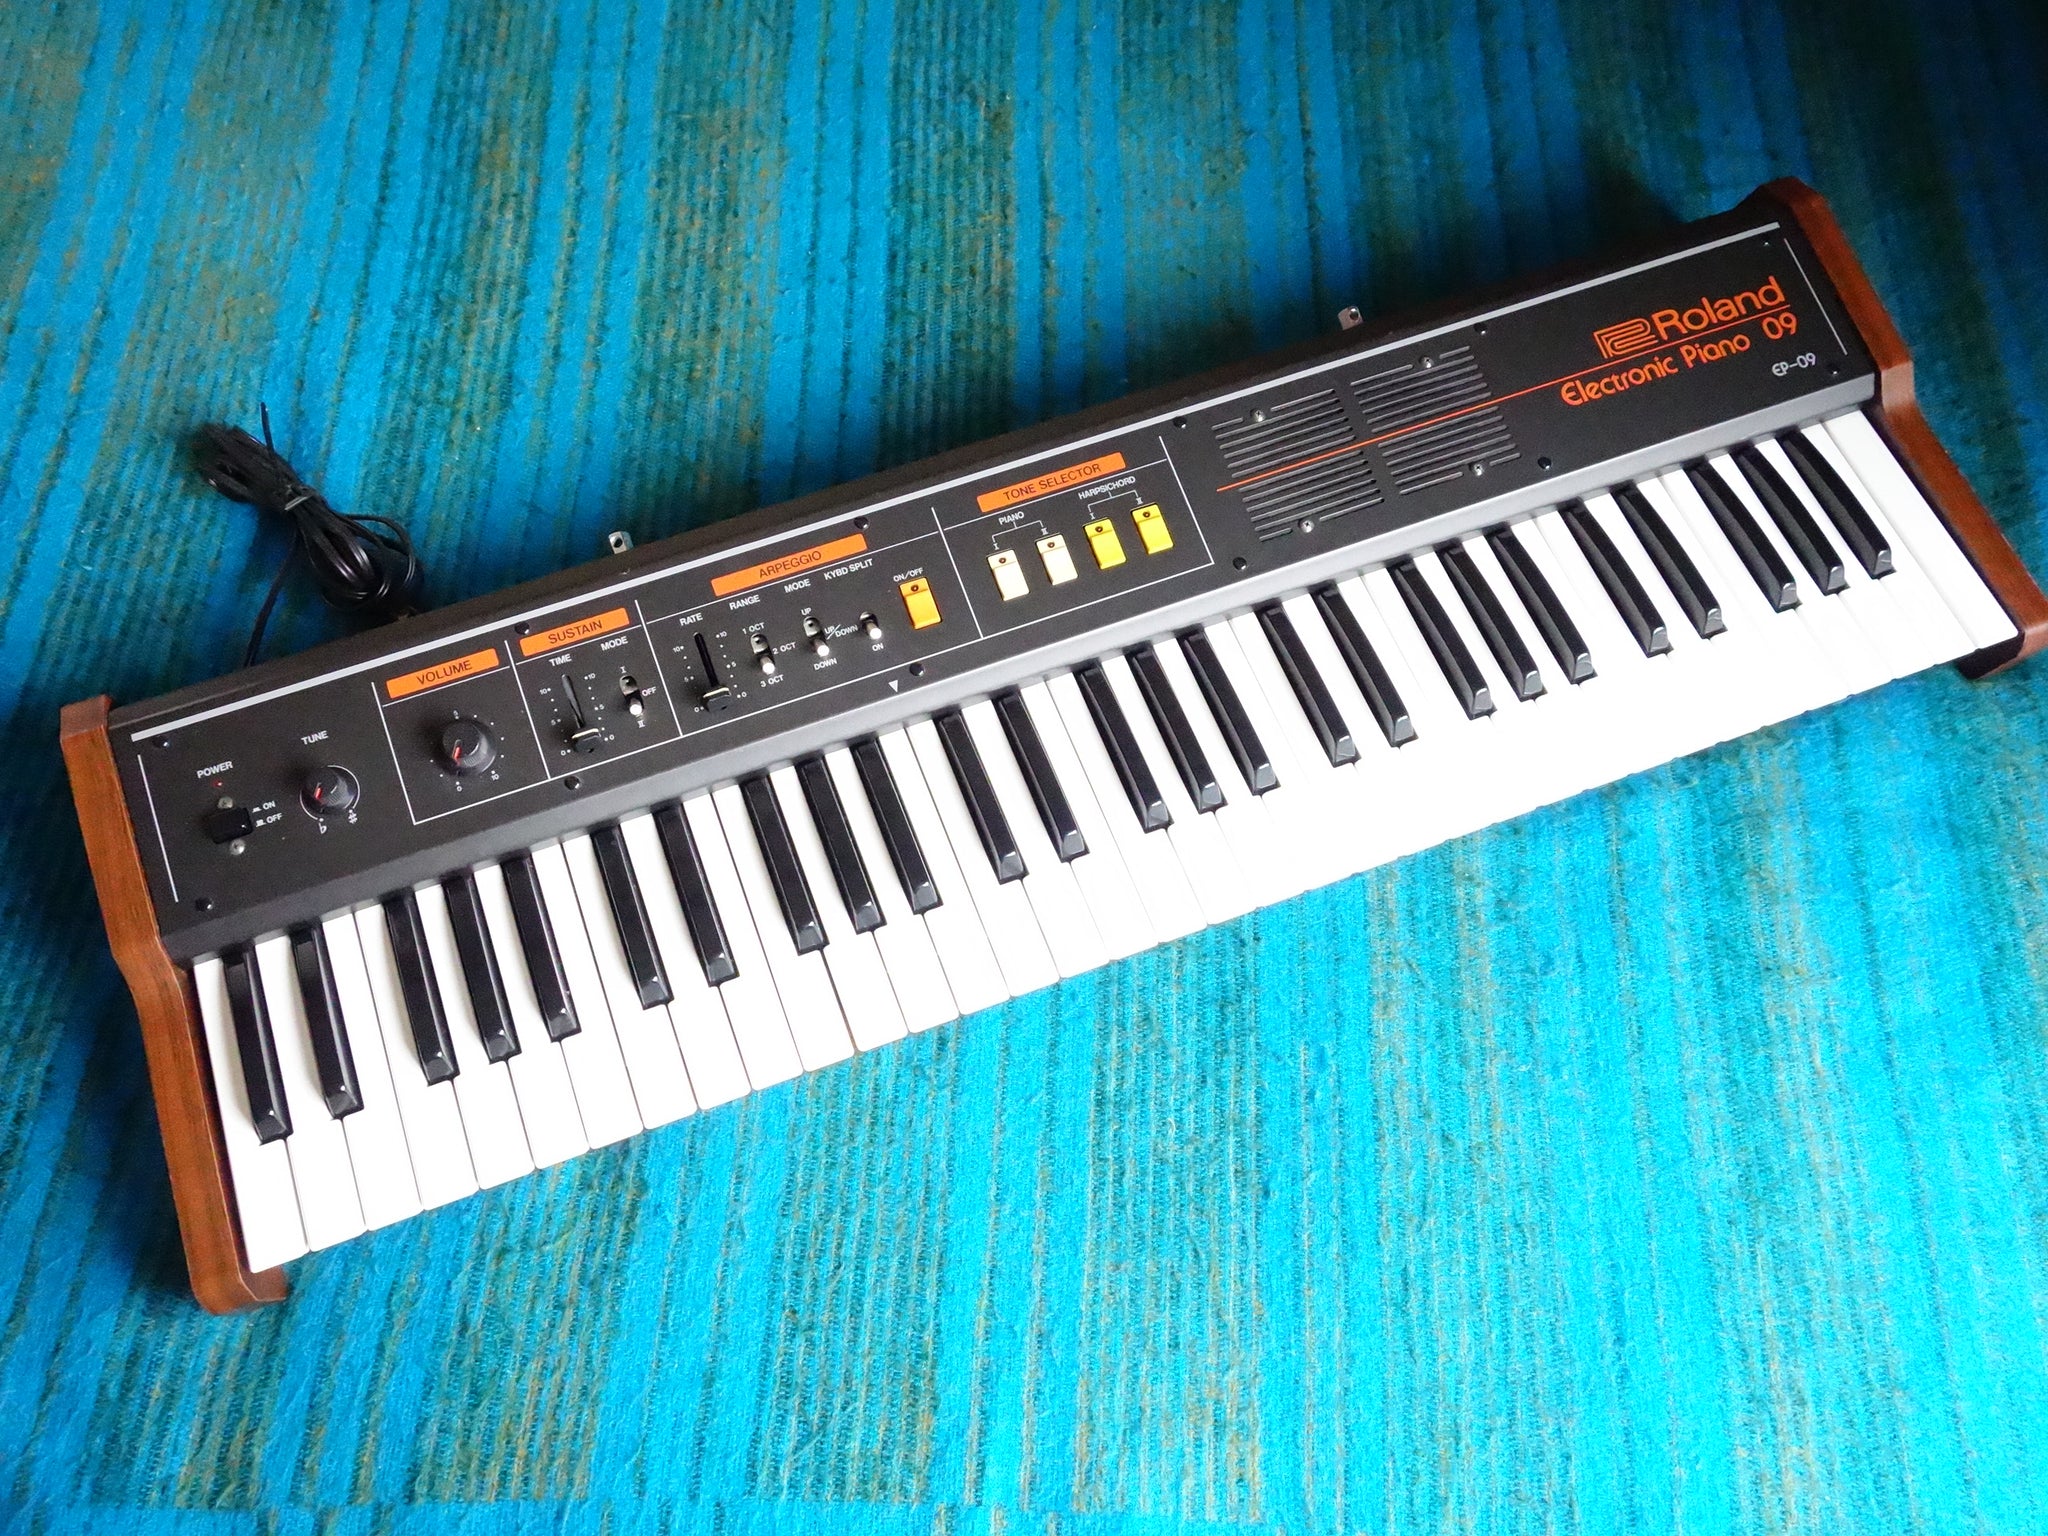 Roland EP-09 Electronic Piano - Early 80's Vintage Analog Synthesizer - G67